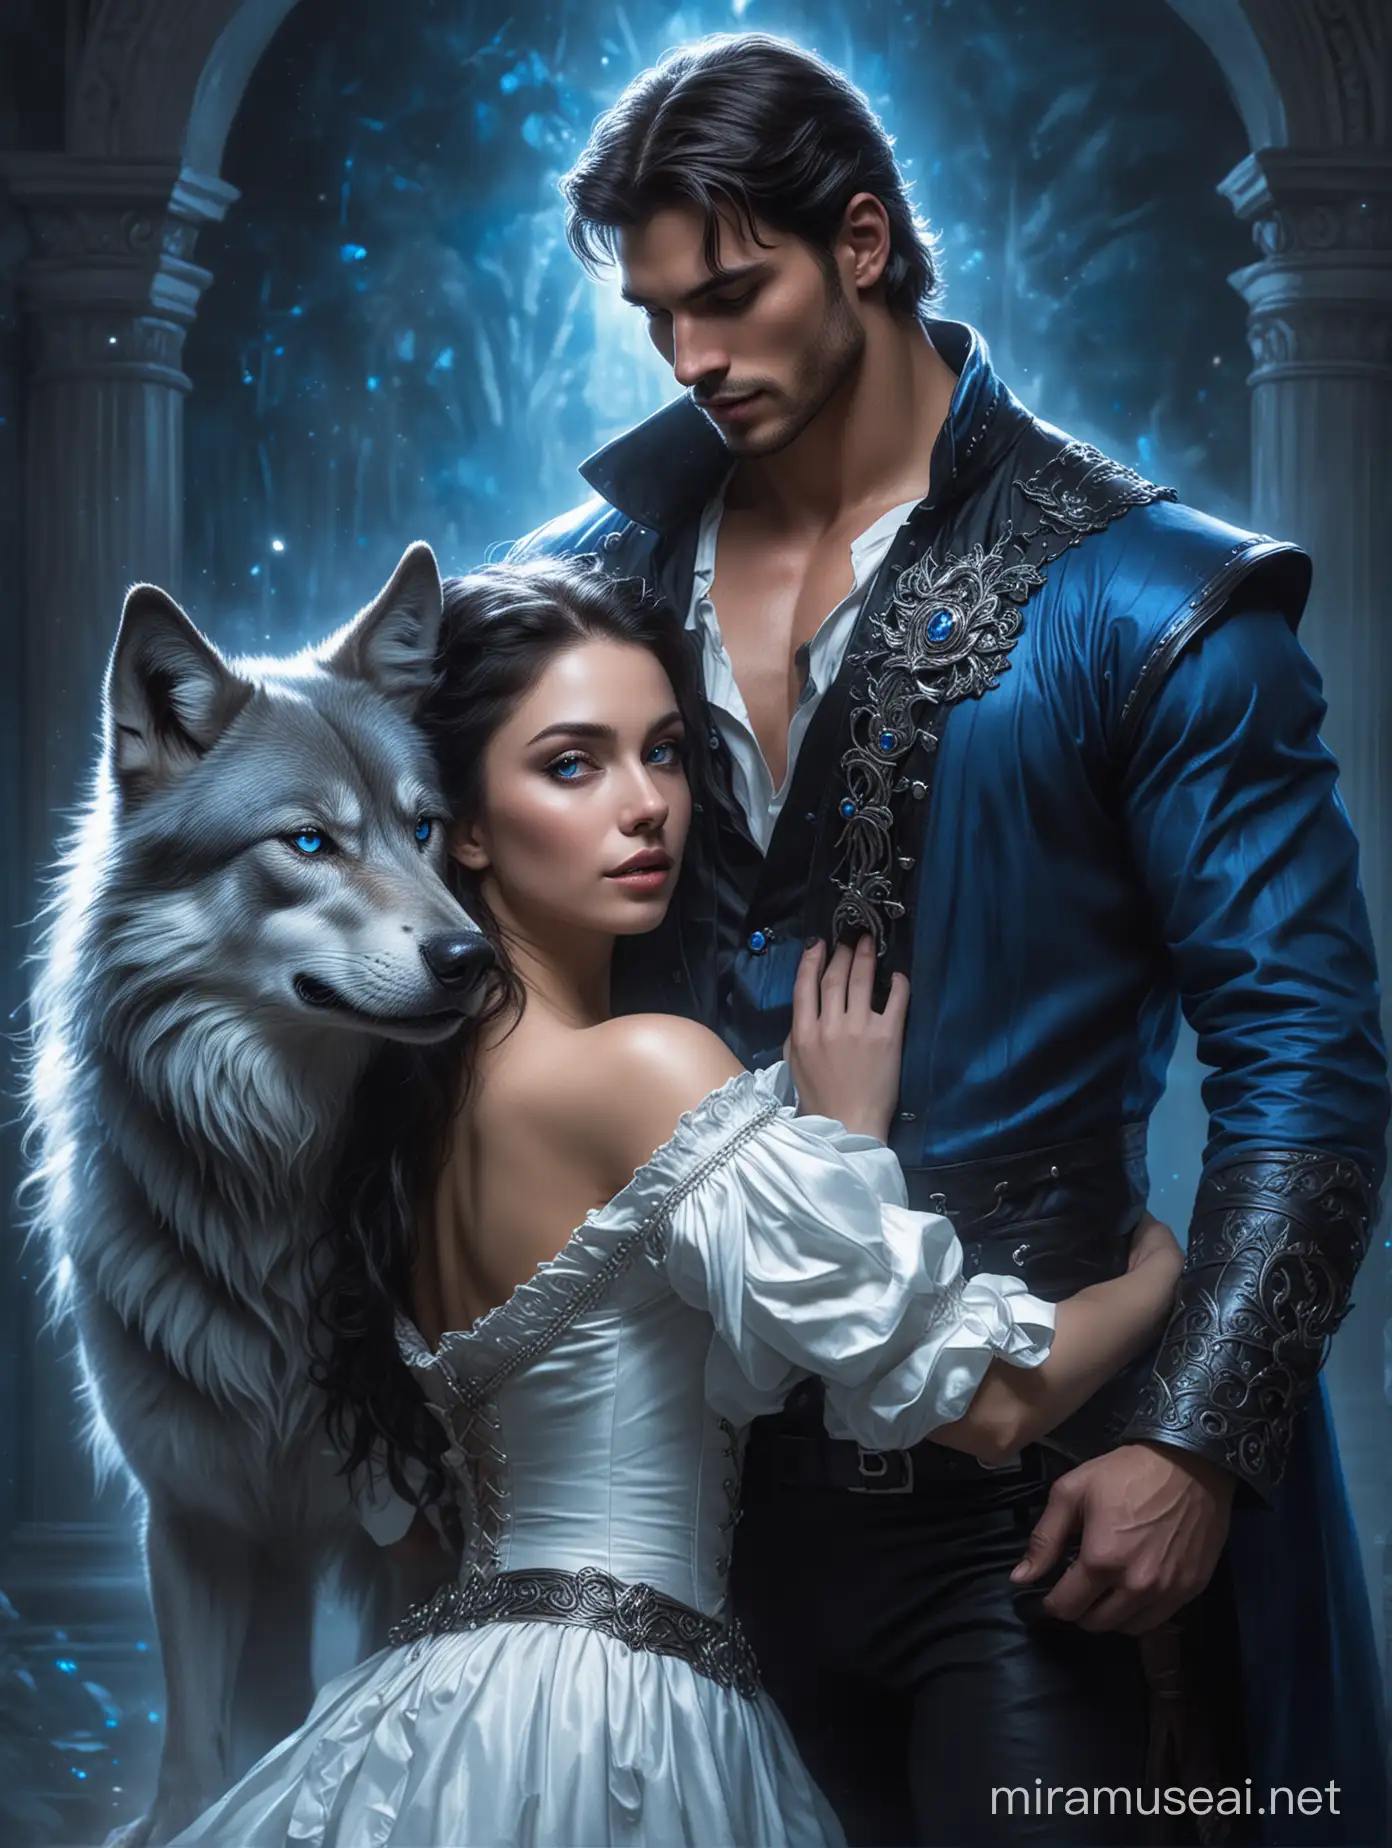 A beautiful lady in a slave attire, held romantically by a handsome young muscular man in a prince attire, with a luminous blue wolf glowing behind them